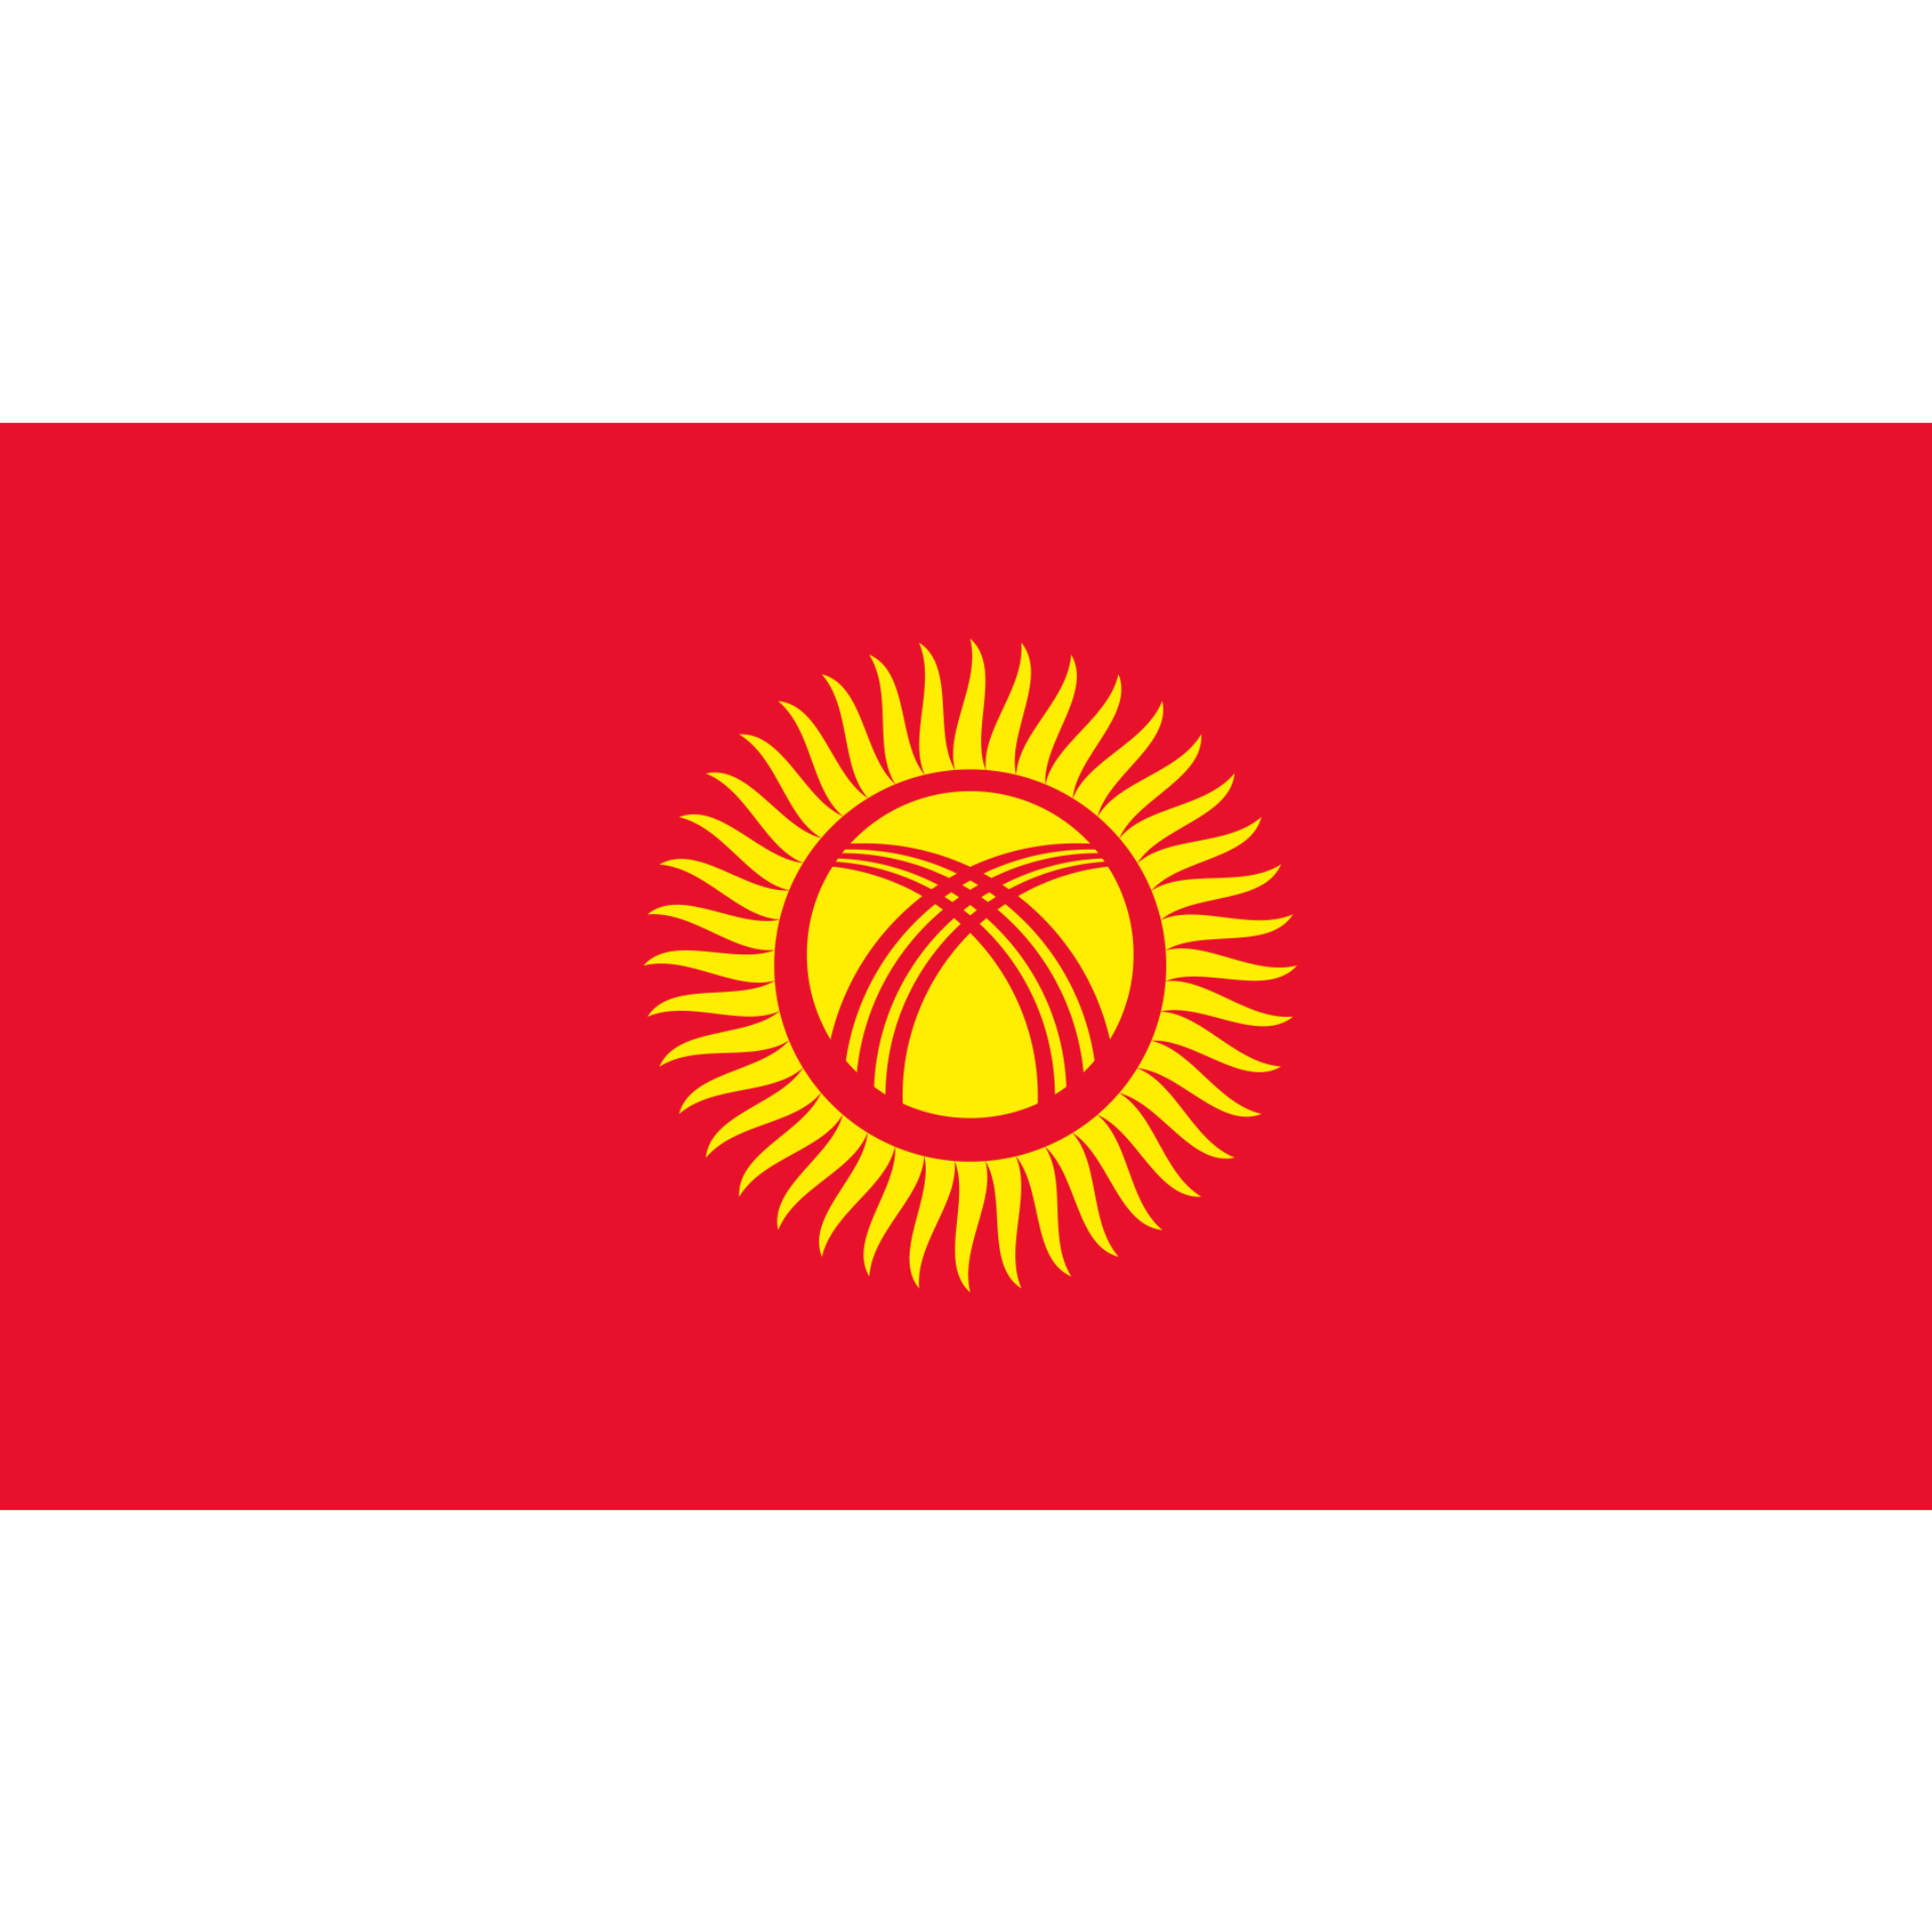 The flag of Kyrgyzstan has a red background with a yellow sun in the centre with 40 rays, crossed by two sets of three lines.